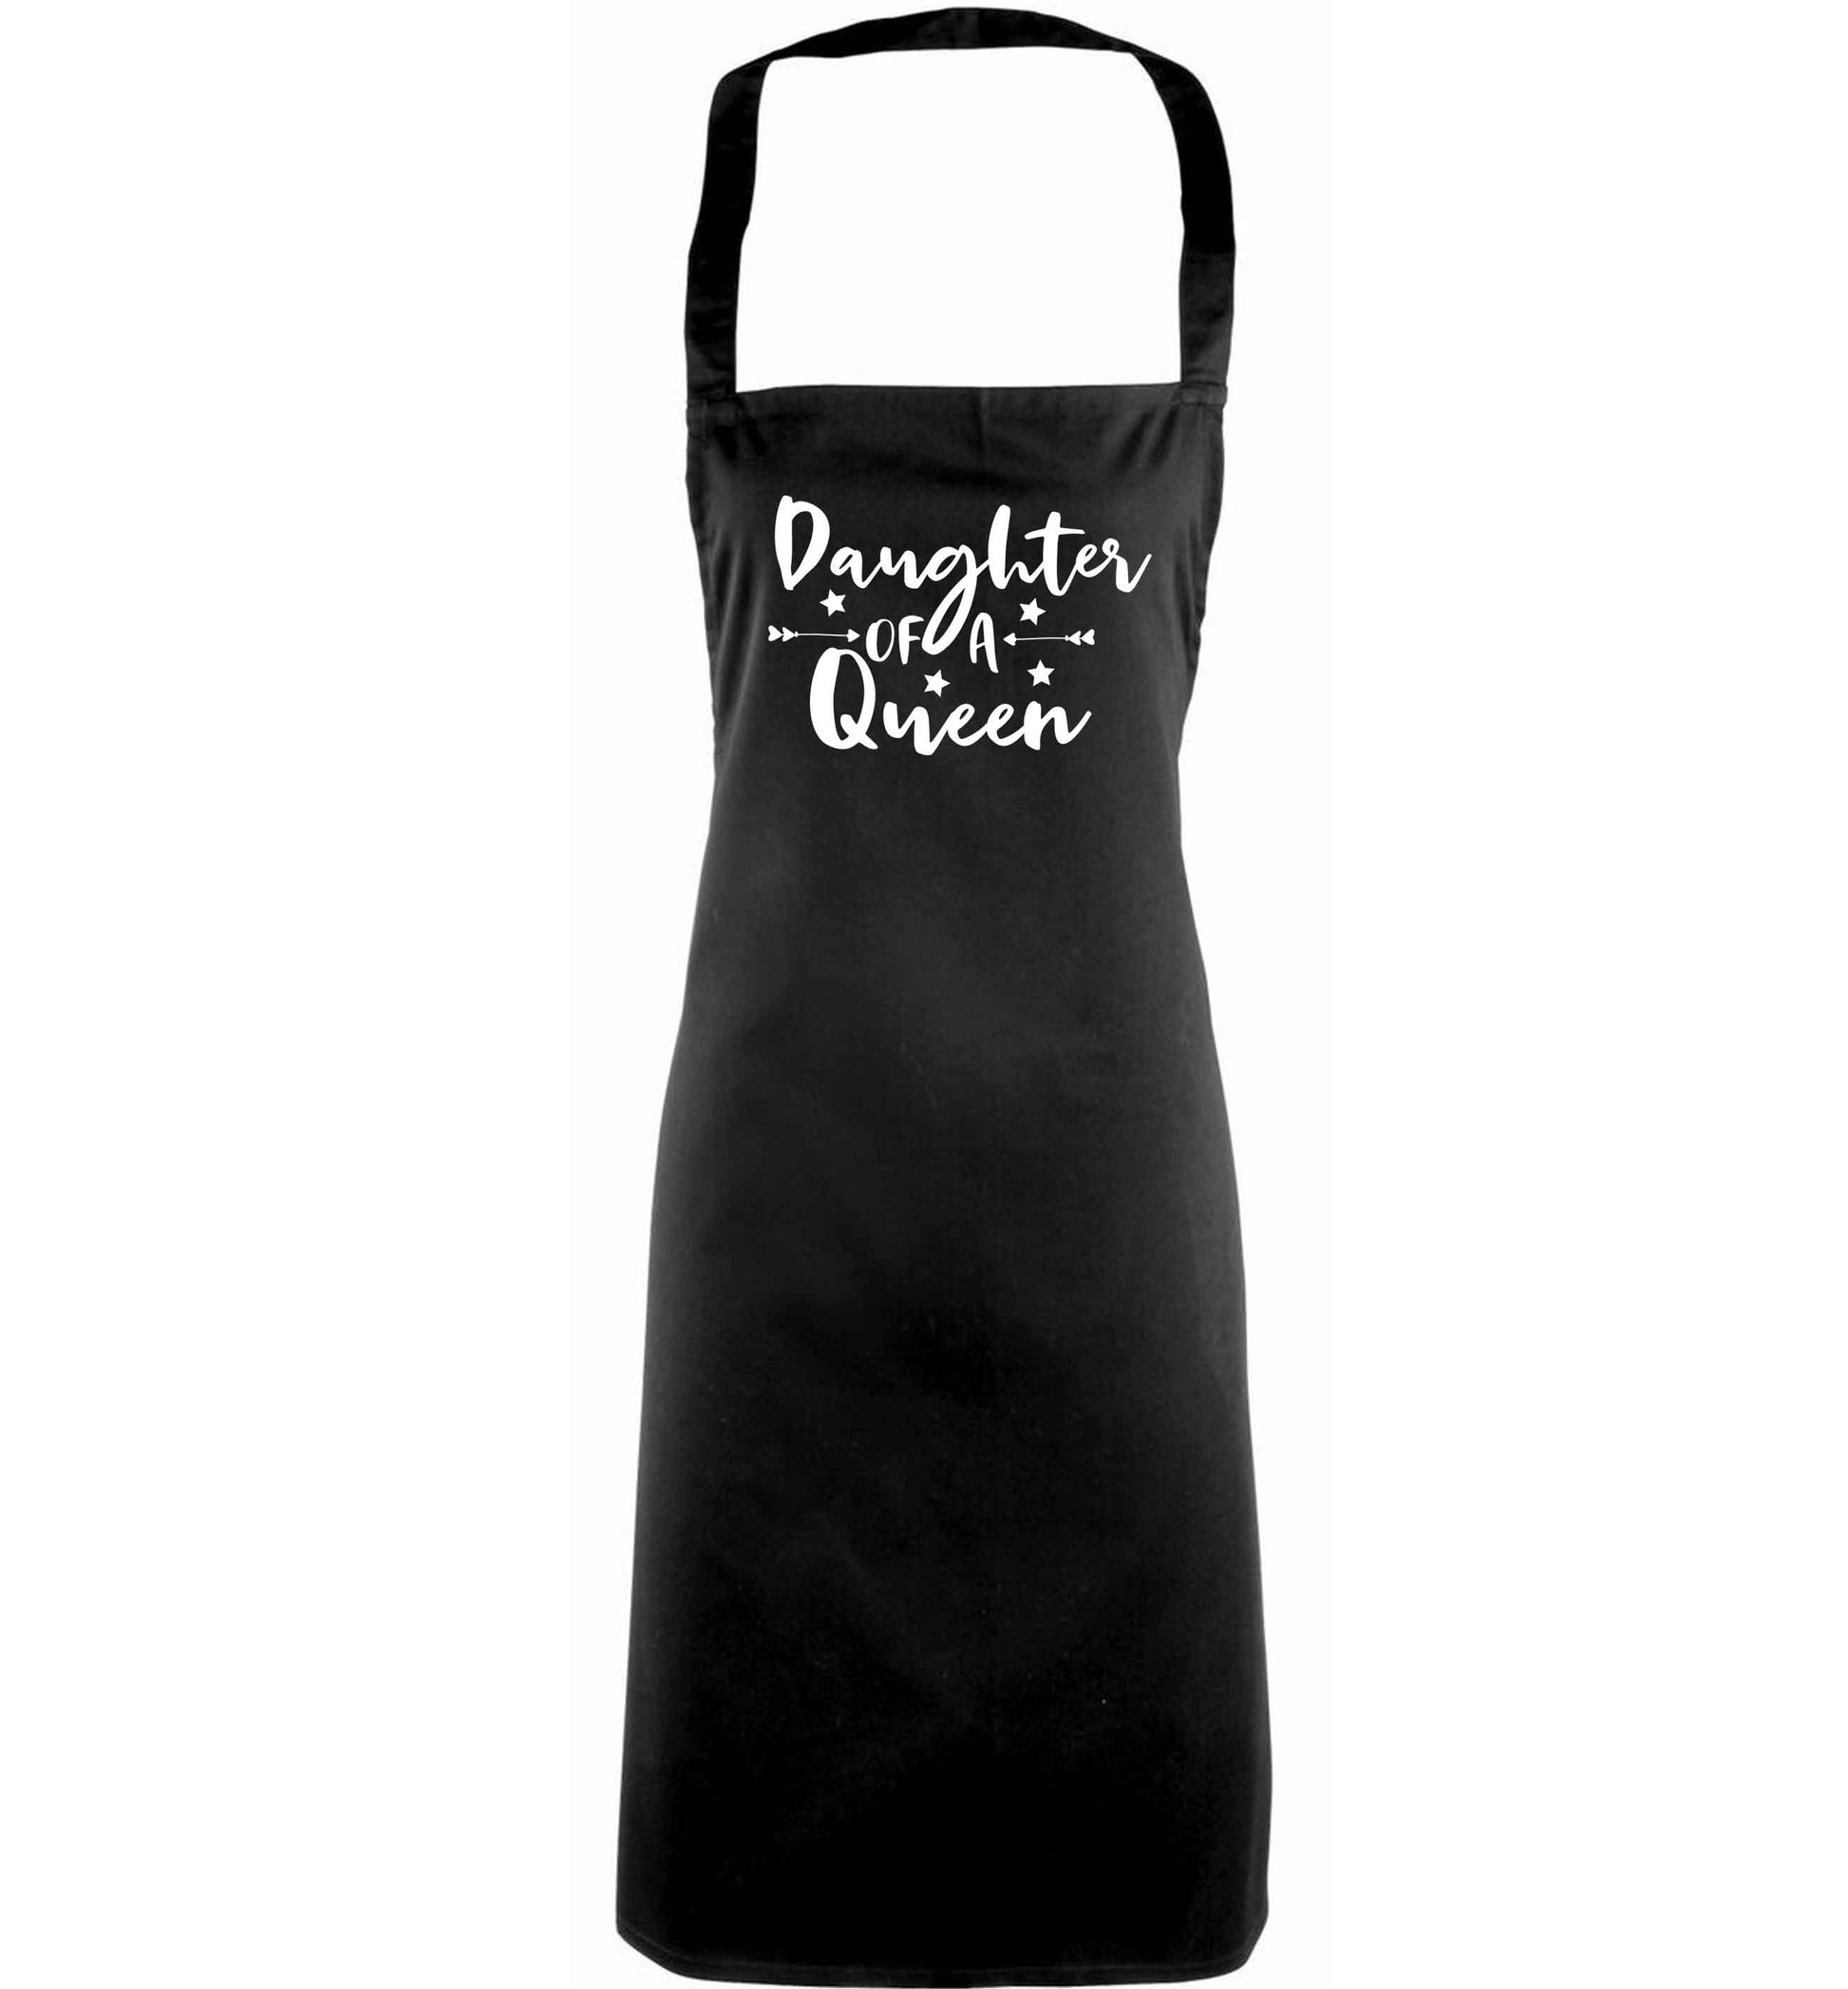 Daughter of a Queen adults black apron